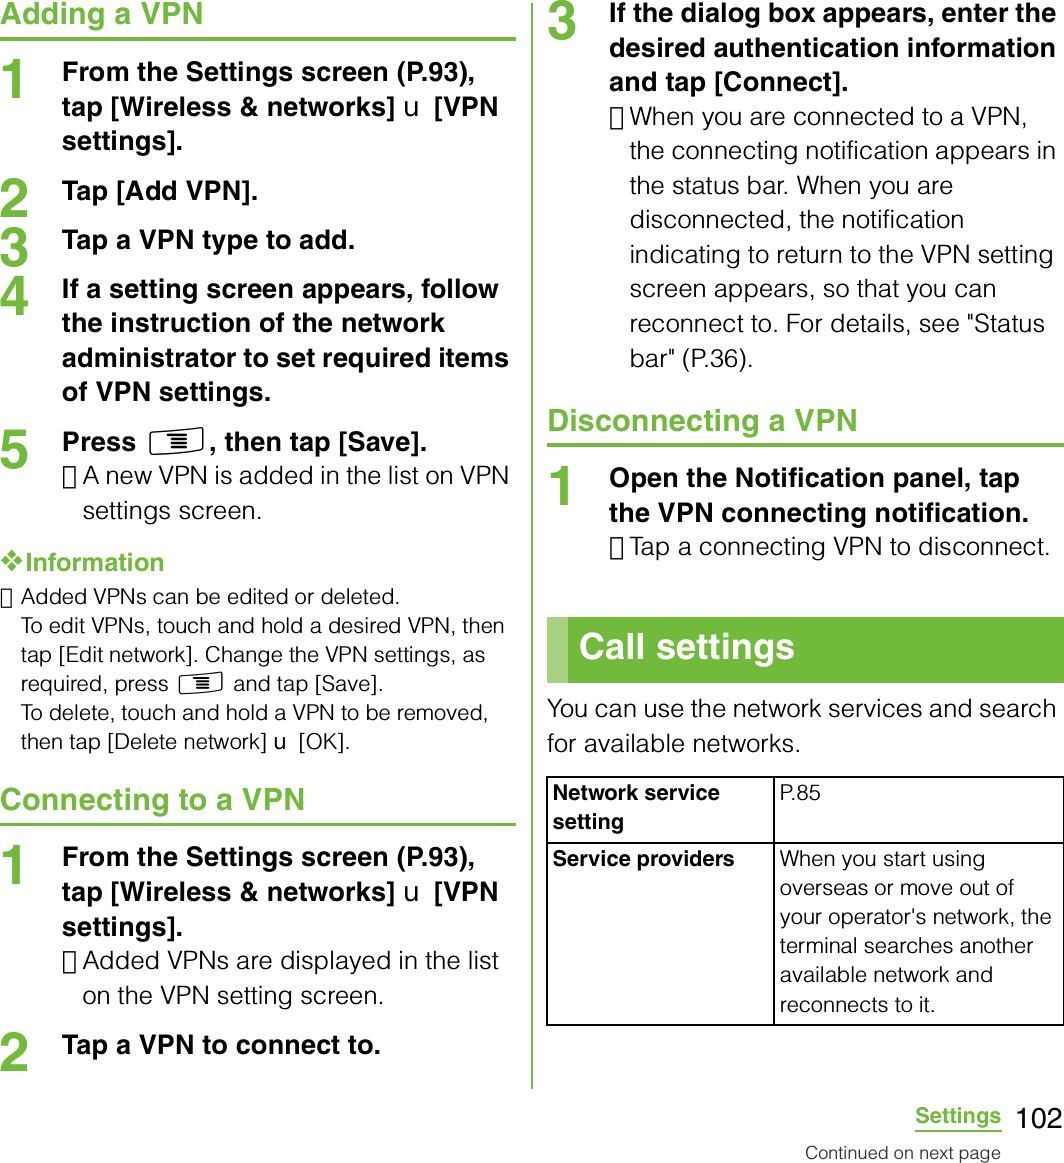 102SettingsAdding a VPN1From the Settings screen (P.93), tap [Wireless &amp; networks] X [VPN settings].2Tap [Add VPN].3Tap a VPN type to add.4If a setting screen appears, follow the instruction of the network administrator to set required items of VPN settings.5Press t, then tap [Save].･A new VPN is added in the list on VPN settings screen.❖Information･Added VPNs can be edited or deleted.To edit VPNs, touch and hold a desired VPN, then tap [Edit network]. Change the VPN settings, as required, press t and tap [Save]. To delete, touch and hold a VPN to be removed, then tap [Delete network] X [OK].Connecting to a VPN1From the Settings screen (P.93), tap [Wireless &amp; networks] X [VPN settings].･Added VPNs are displayed in the list on the VPN setting screen.2Tap a VPN to connect to.3If the dialog box appears, enter the desired authentication information and tap [Connect].･When you are connected to a VPN, the connecting notification appears in the status bar. When you are disconnected, the notification indicating to return to the VPN setting screen appears, so that you can reconnect to. For details, see &quot;Status bar&quot; (P.36).Disconnecting a VPN1Open the Notification panel, tap the VPN connecting notification.･Tap a connecting VPN to disconnect.You can use the network services and search for available networks.Call settingsNetwork service settingP. 8 5Service providers When you start using overseas or move out of your operator&apos;s network, the terminal searches another available network and reconnects to it.Continued on next page